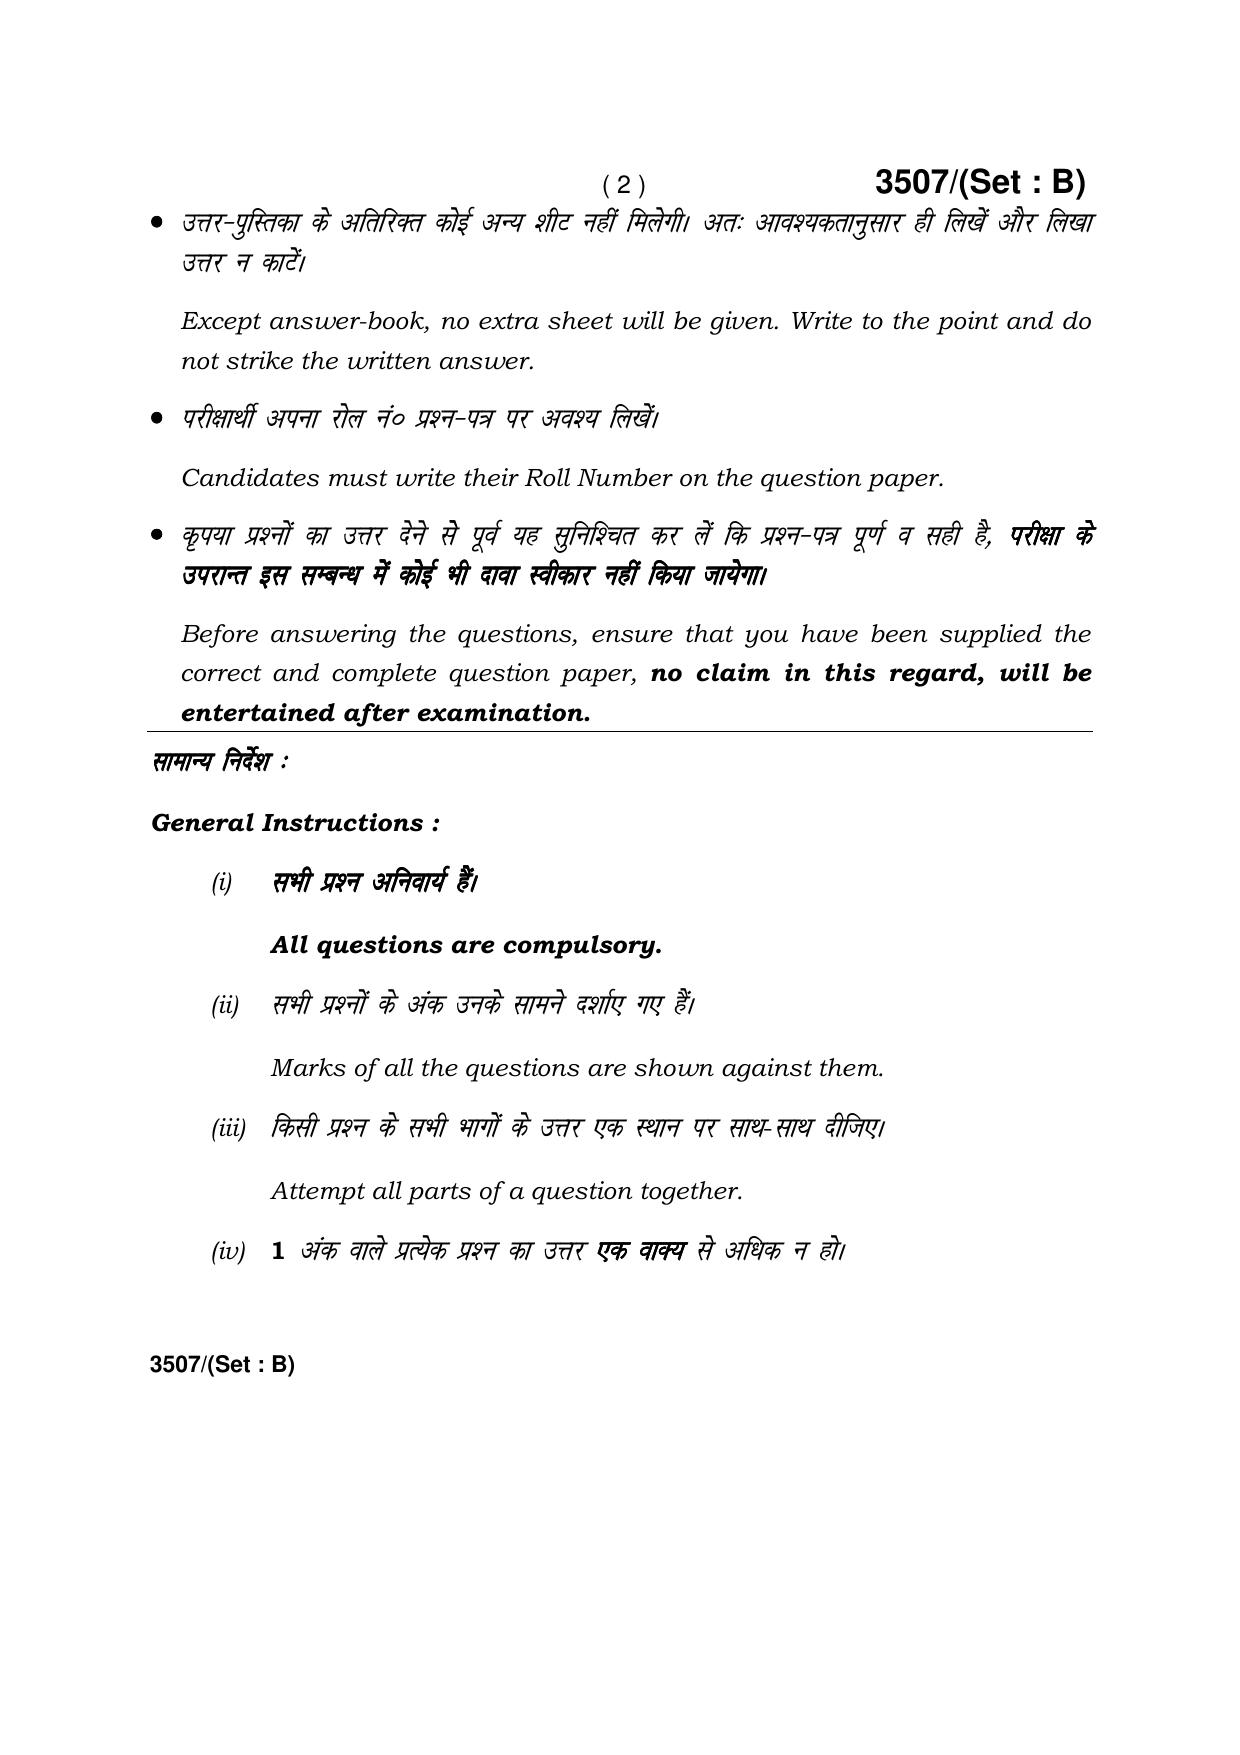 Haryana Board HBSE Class 10 Social Science -B 2018 Question Paper - Page 2